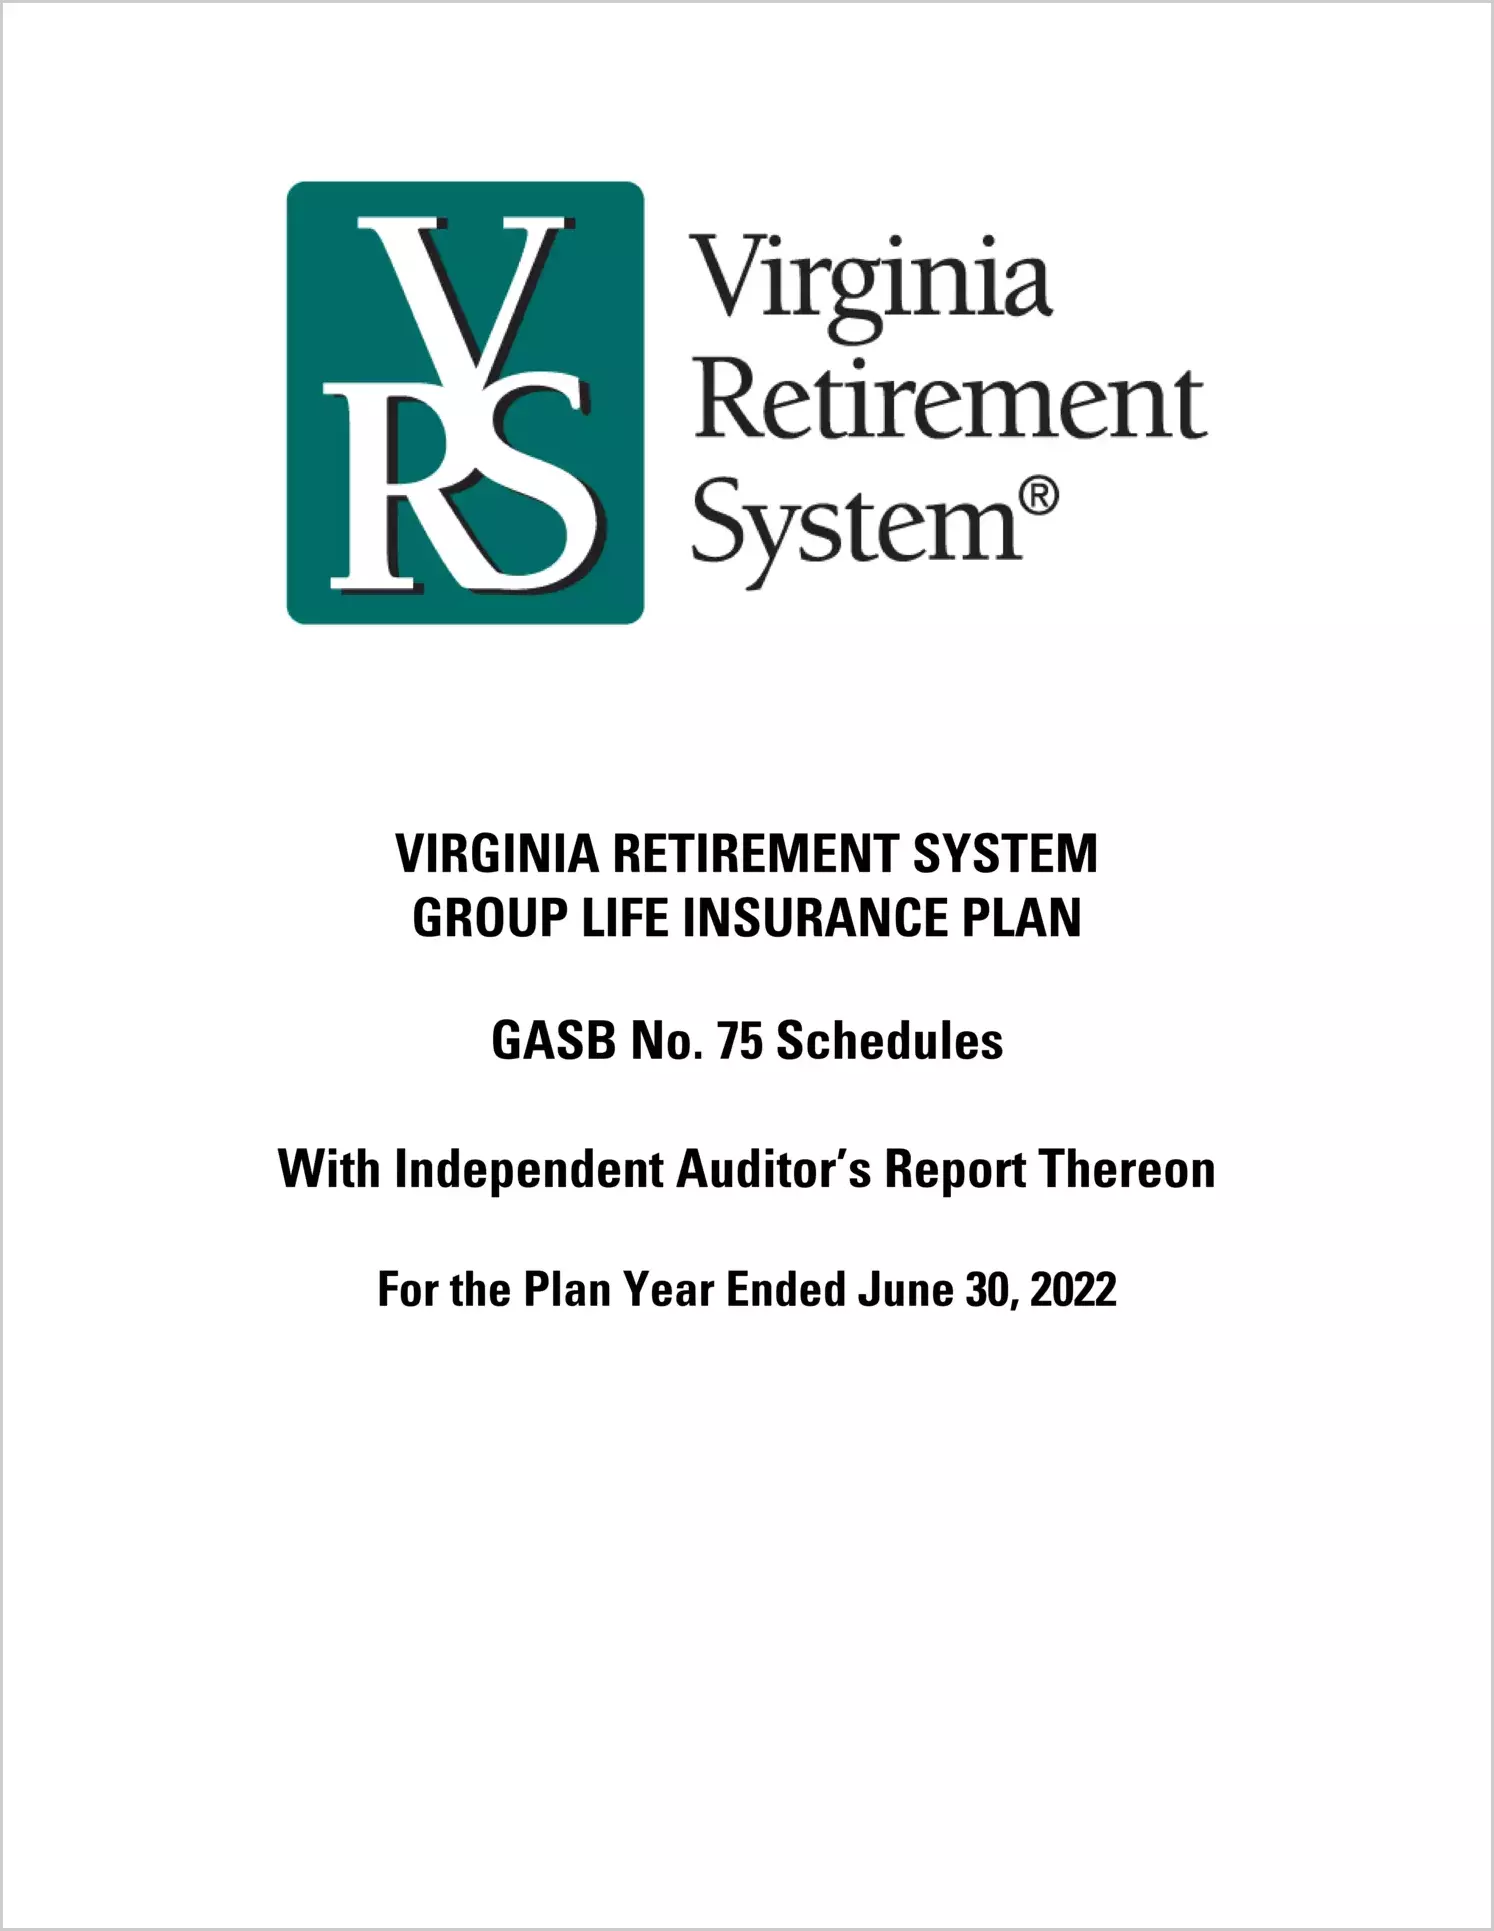 GASB 75 Schedules - Virginia Retirement System Group Life Insurance Plan for the year ended June 30, 2022